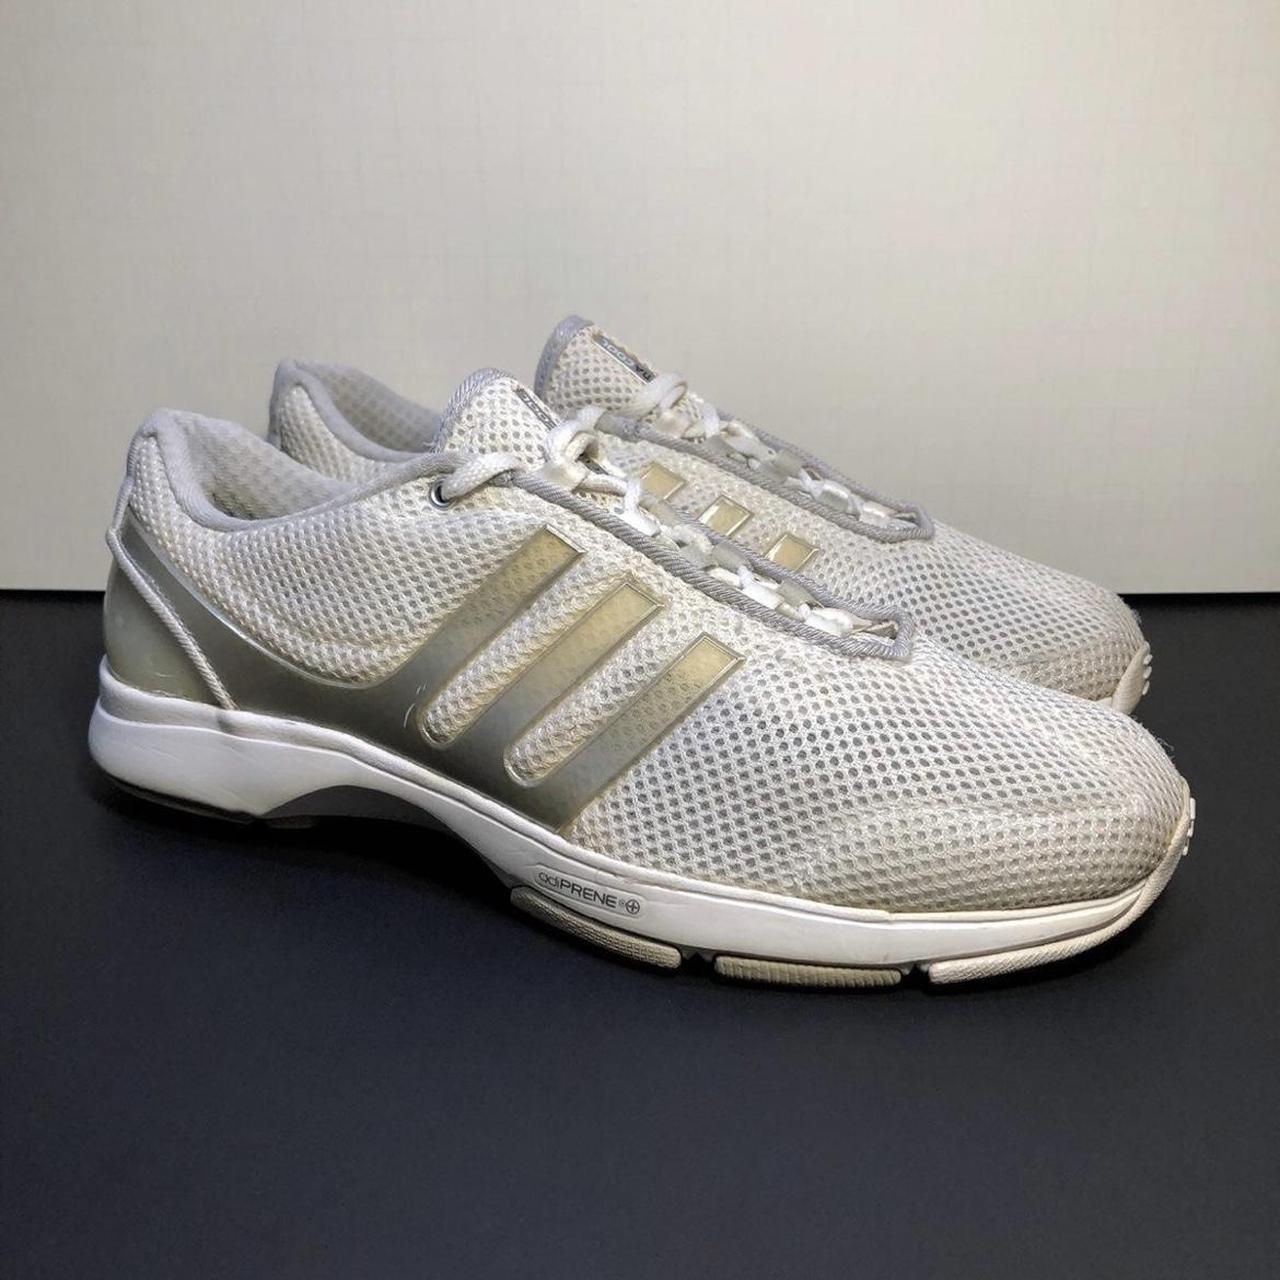 kan opfattes basen Uovertruffen Adidas Women's White and Grey Trainers | Depop